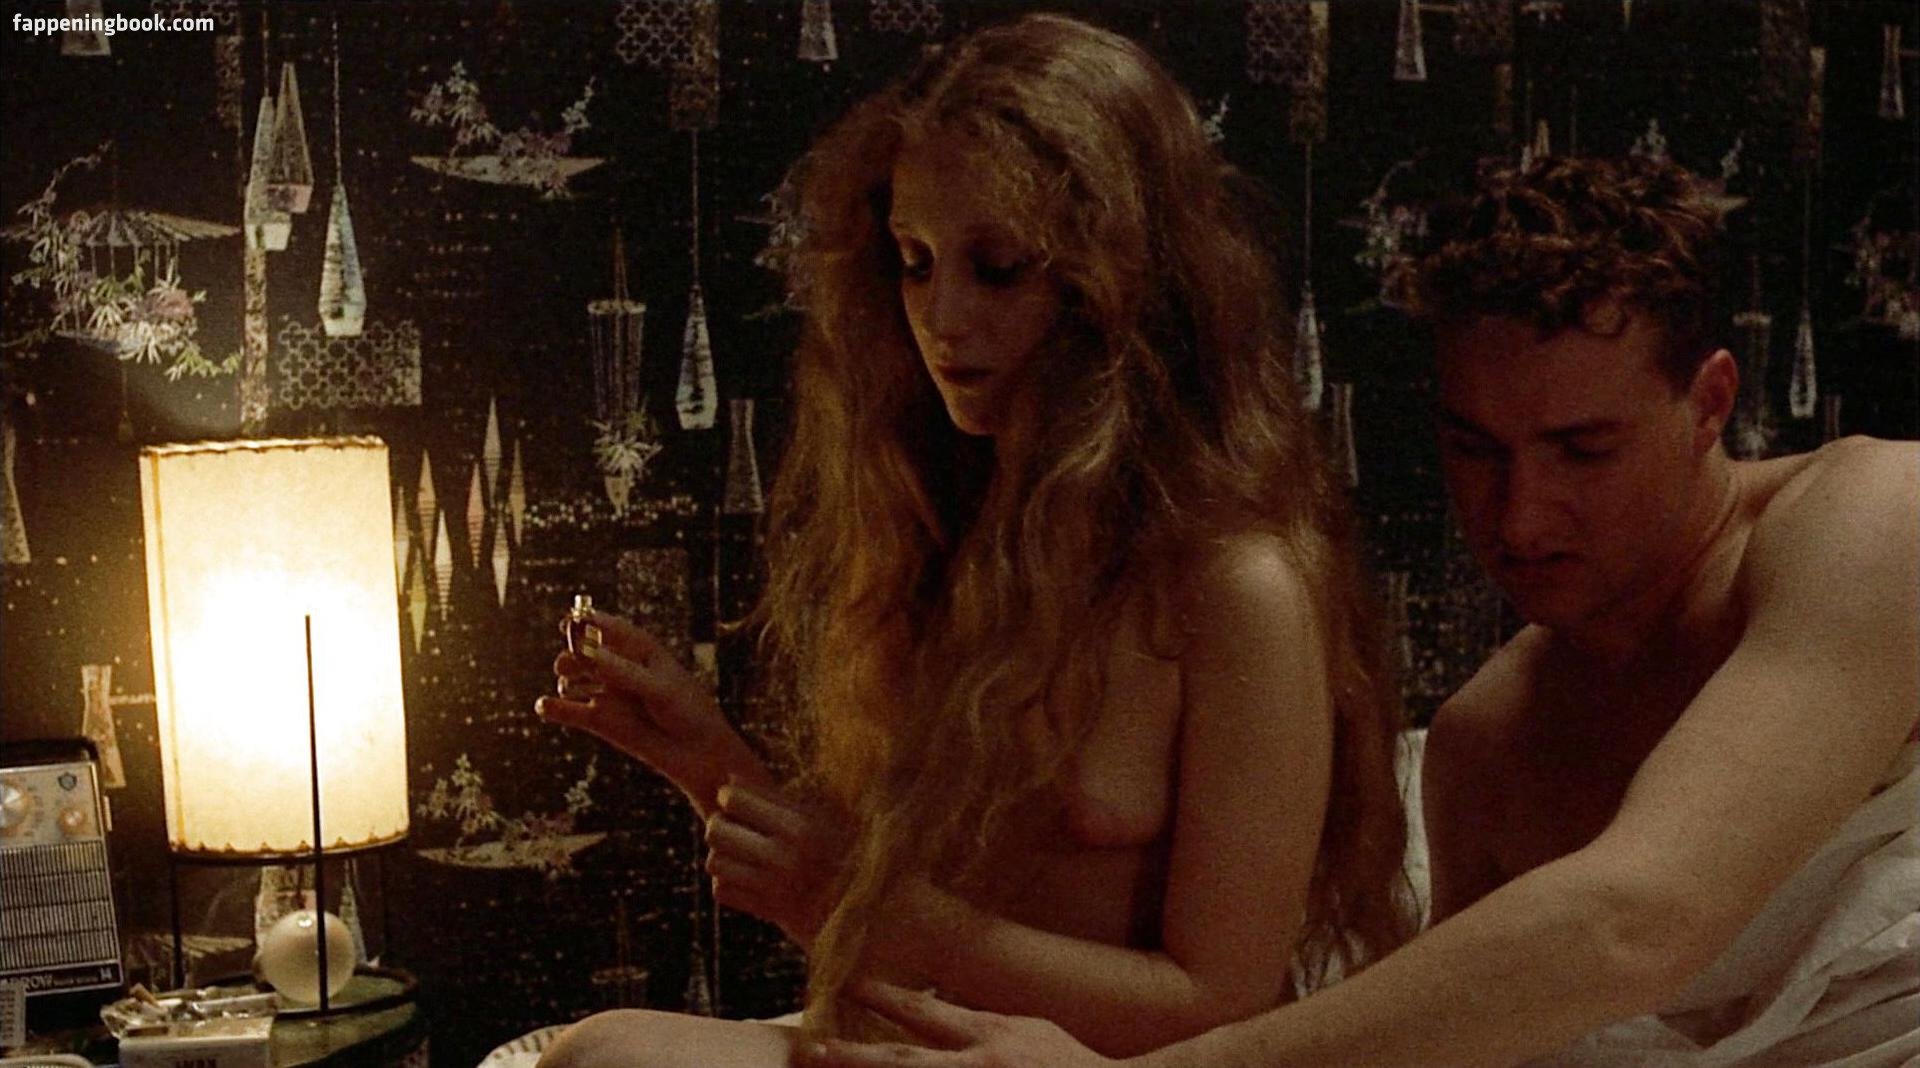 Carol Kane Nude, The Fappening - Photo #101413 - FappeningBook.